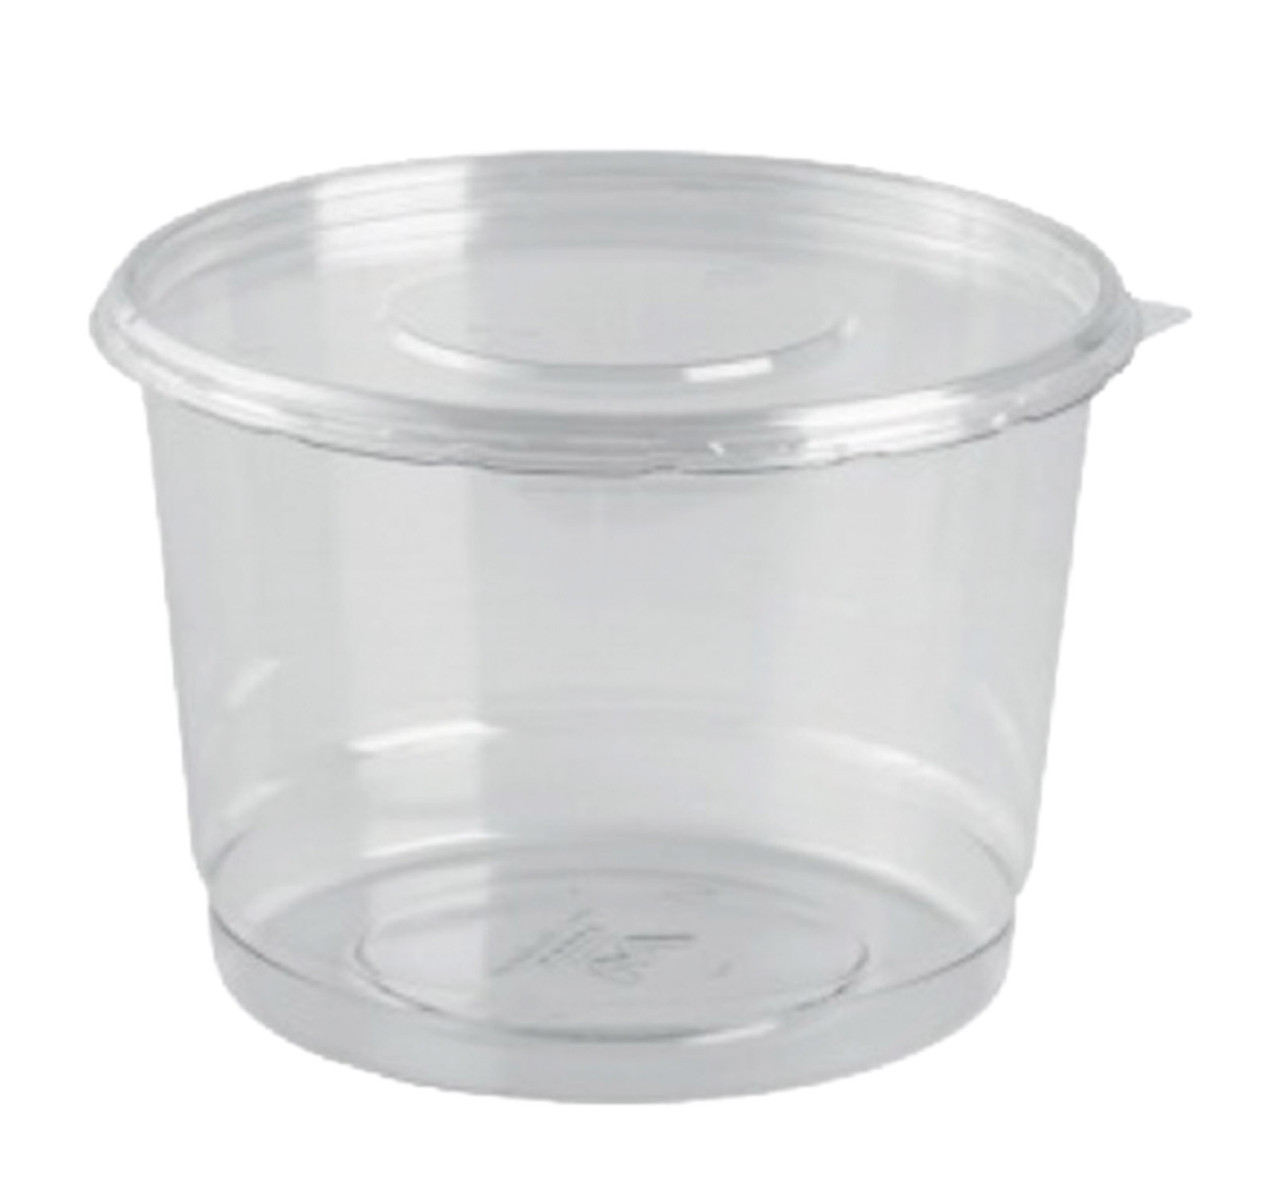 16oz DELI CONTAINER WITH LID - 5 x 2 1/2 TALL - 250/CASE - Wow Plastics,  Inc.